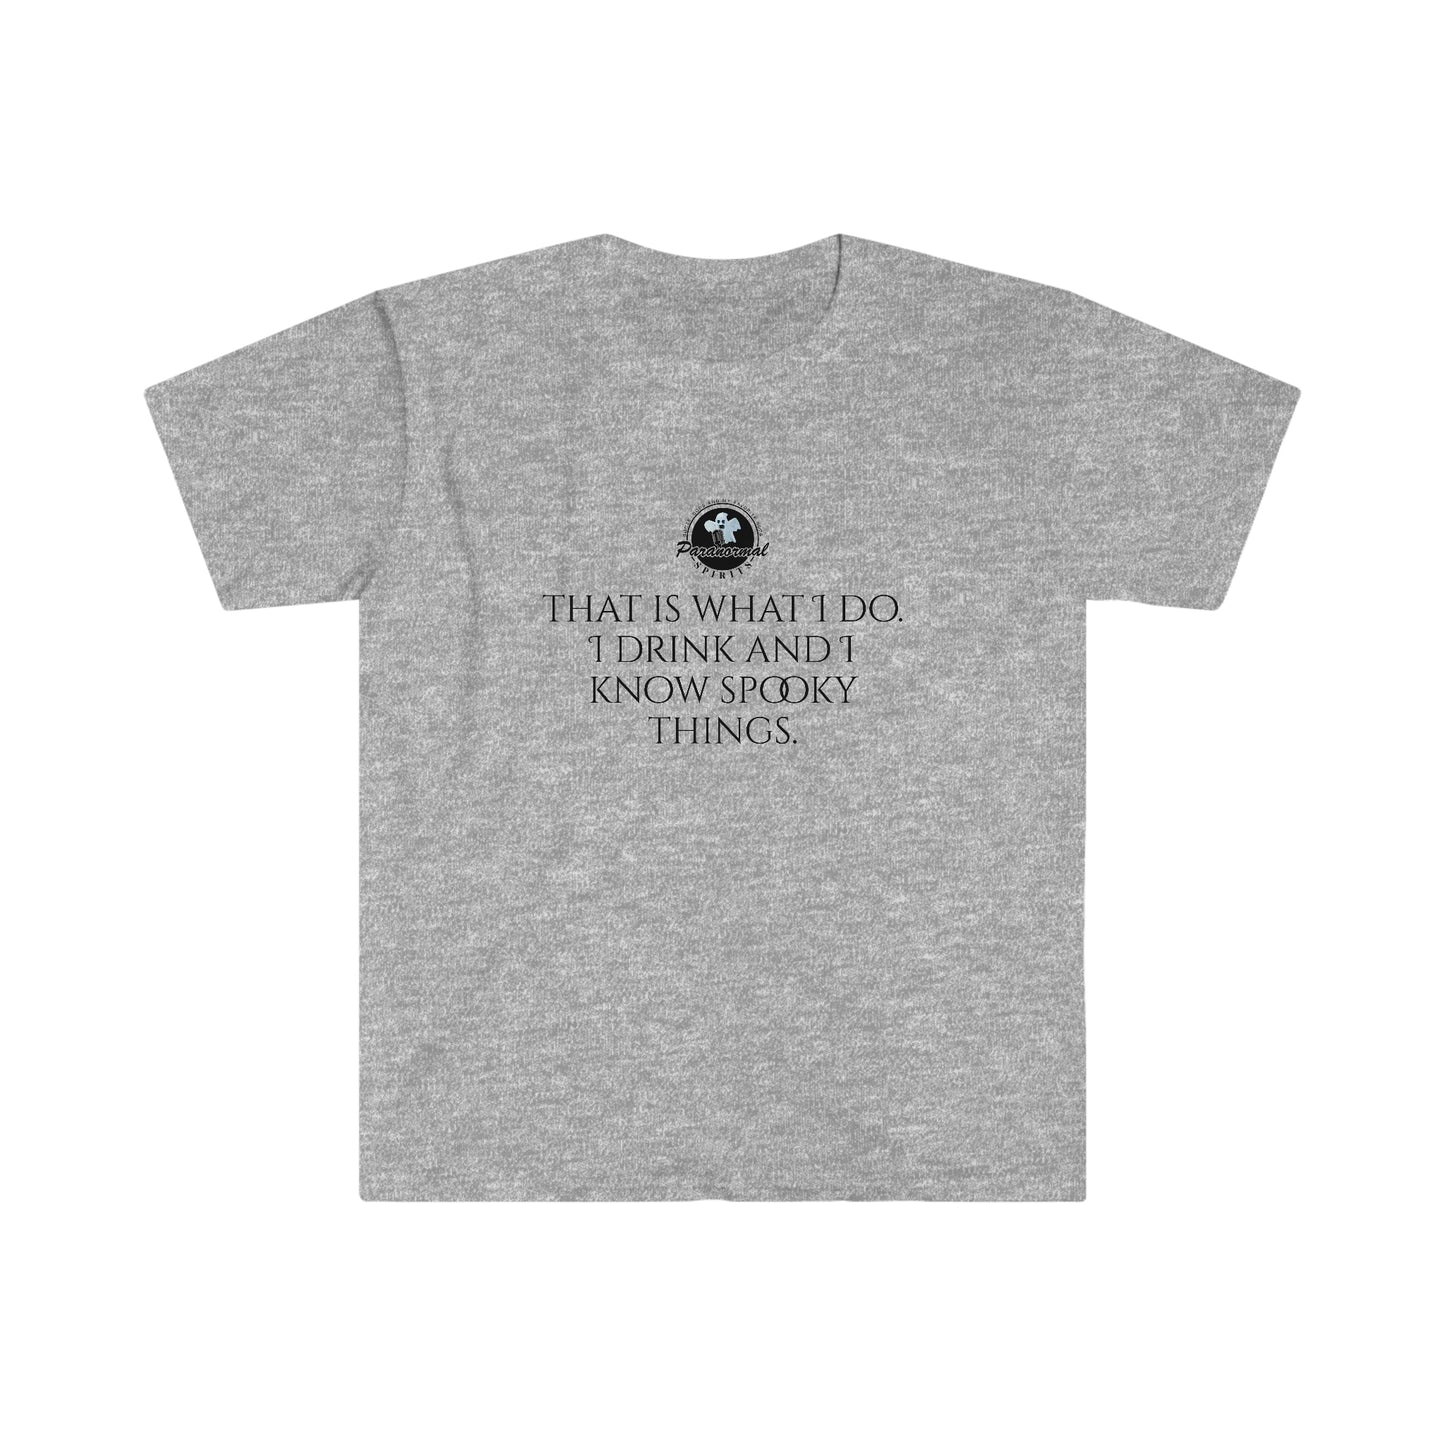 I Drink and I Know Spooky Things T-Shirt